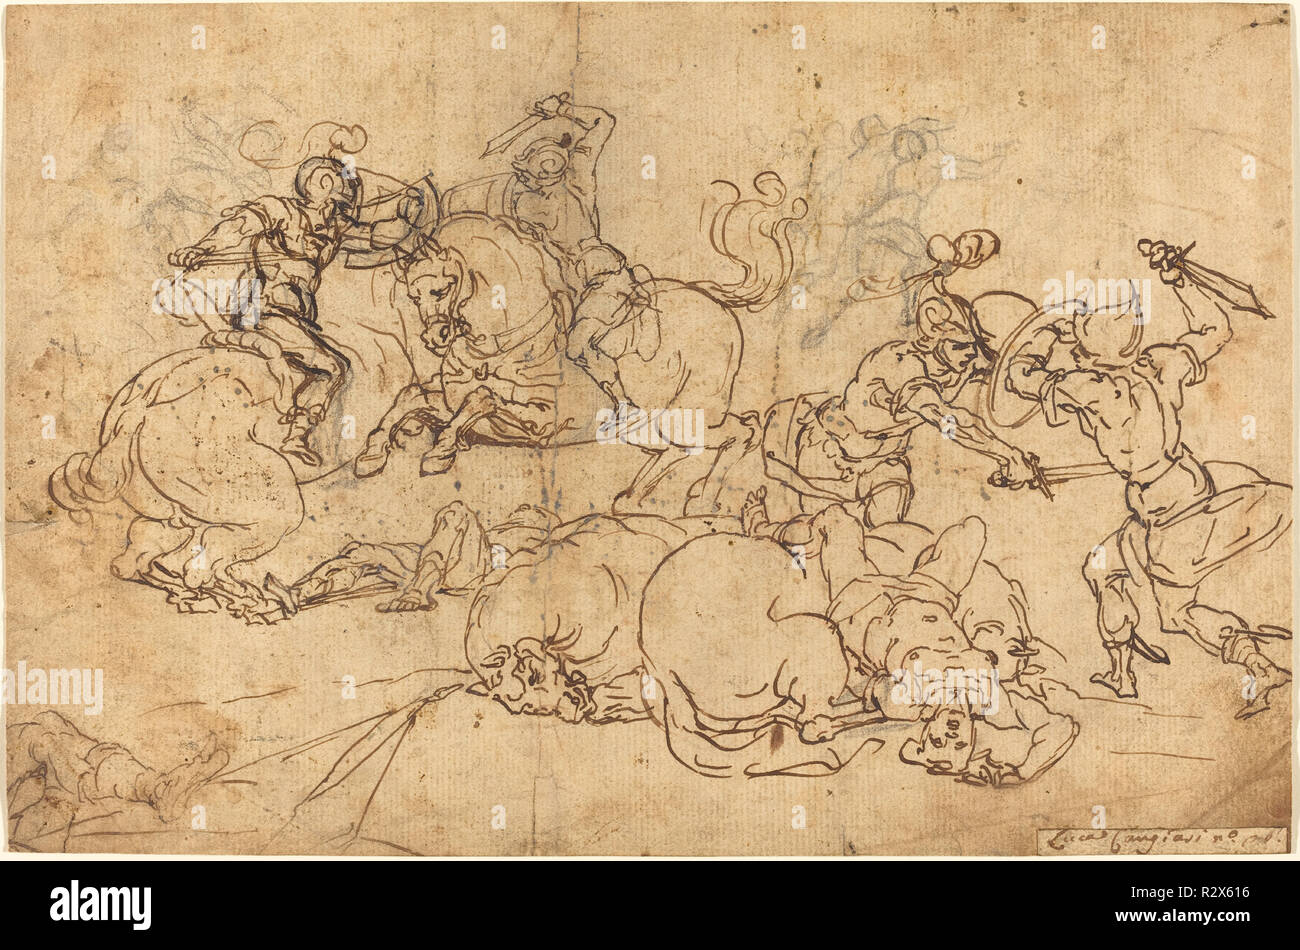 Soldiers Fighting. Dimensions: sheet: 18.4 x 27.9 cm (7 1/4 x 11 in.). Medium: pen and brown ink over black chalk on laid paper. Museum: National Gallery of Art, Washington DC. Author: GIOVANNI ANDREA ANSALDO. Stock Photo